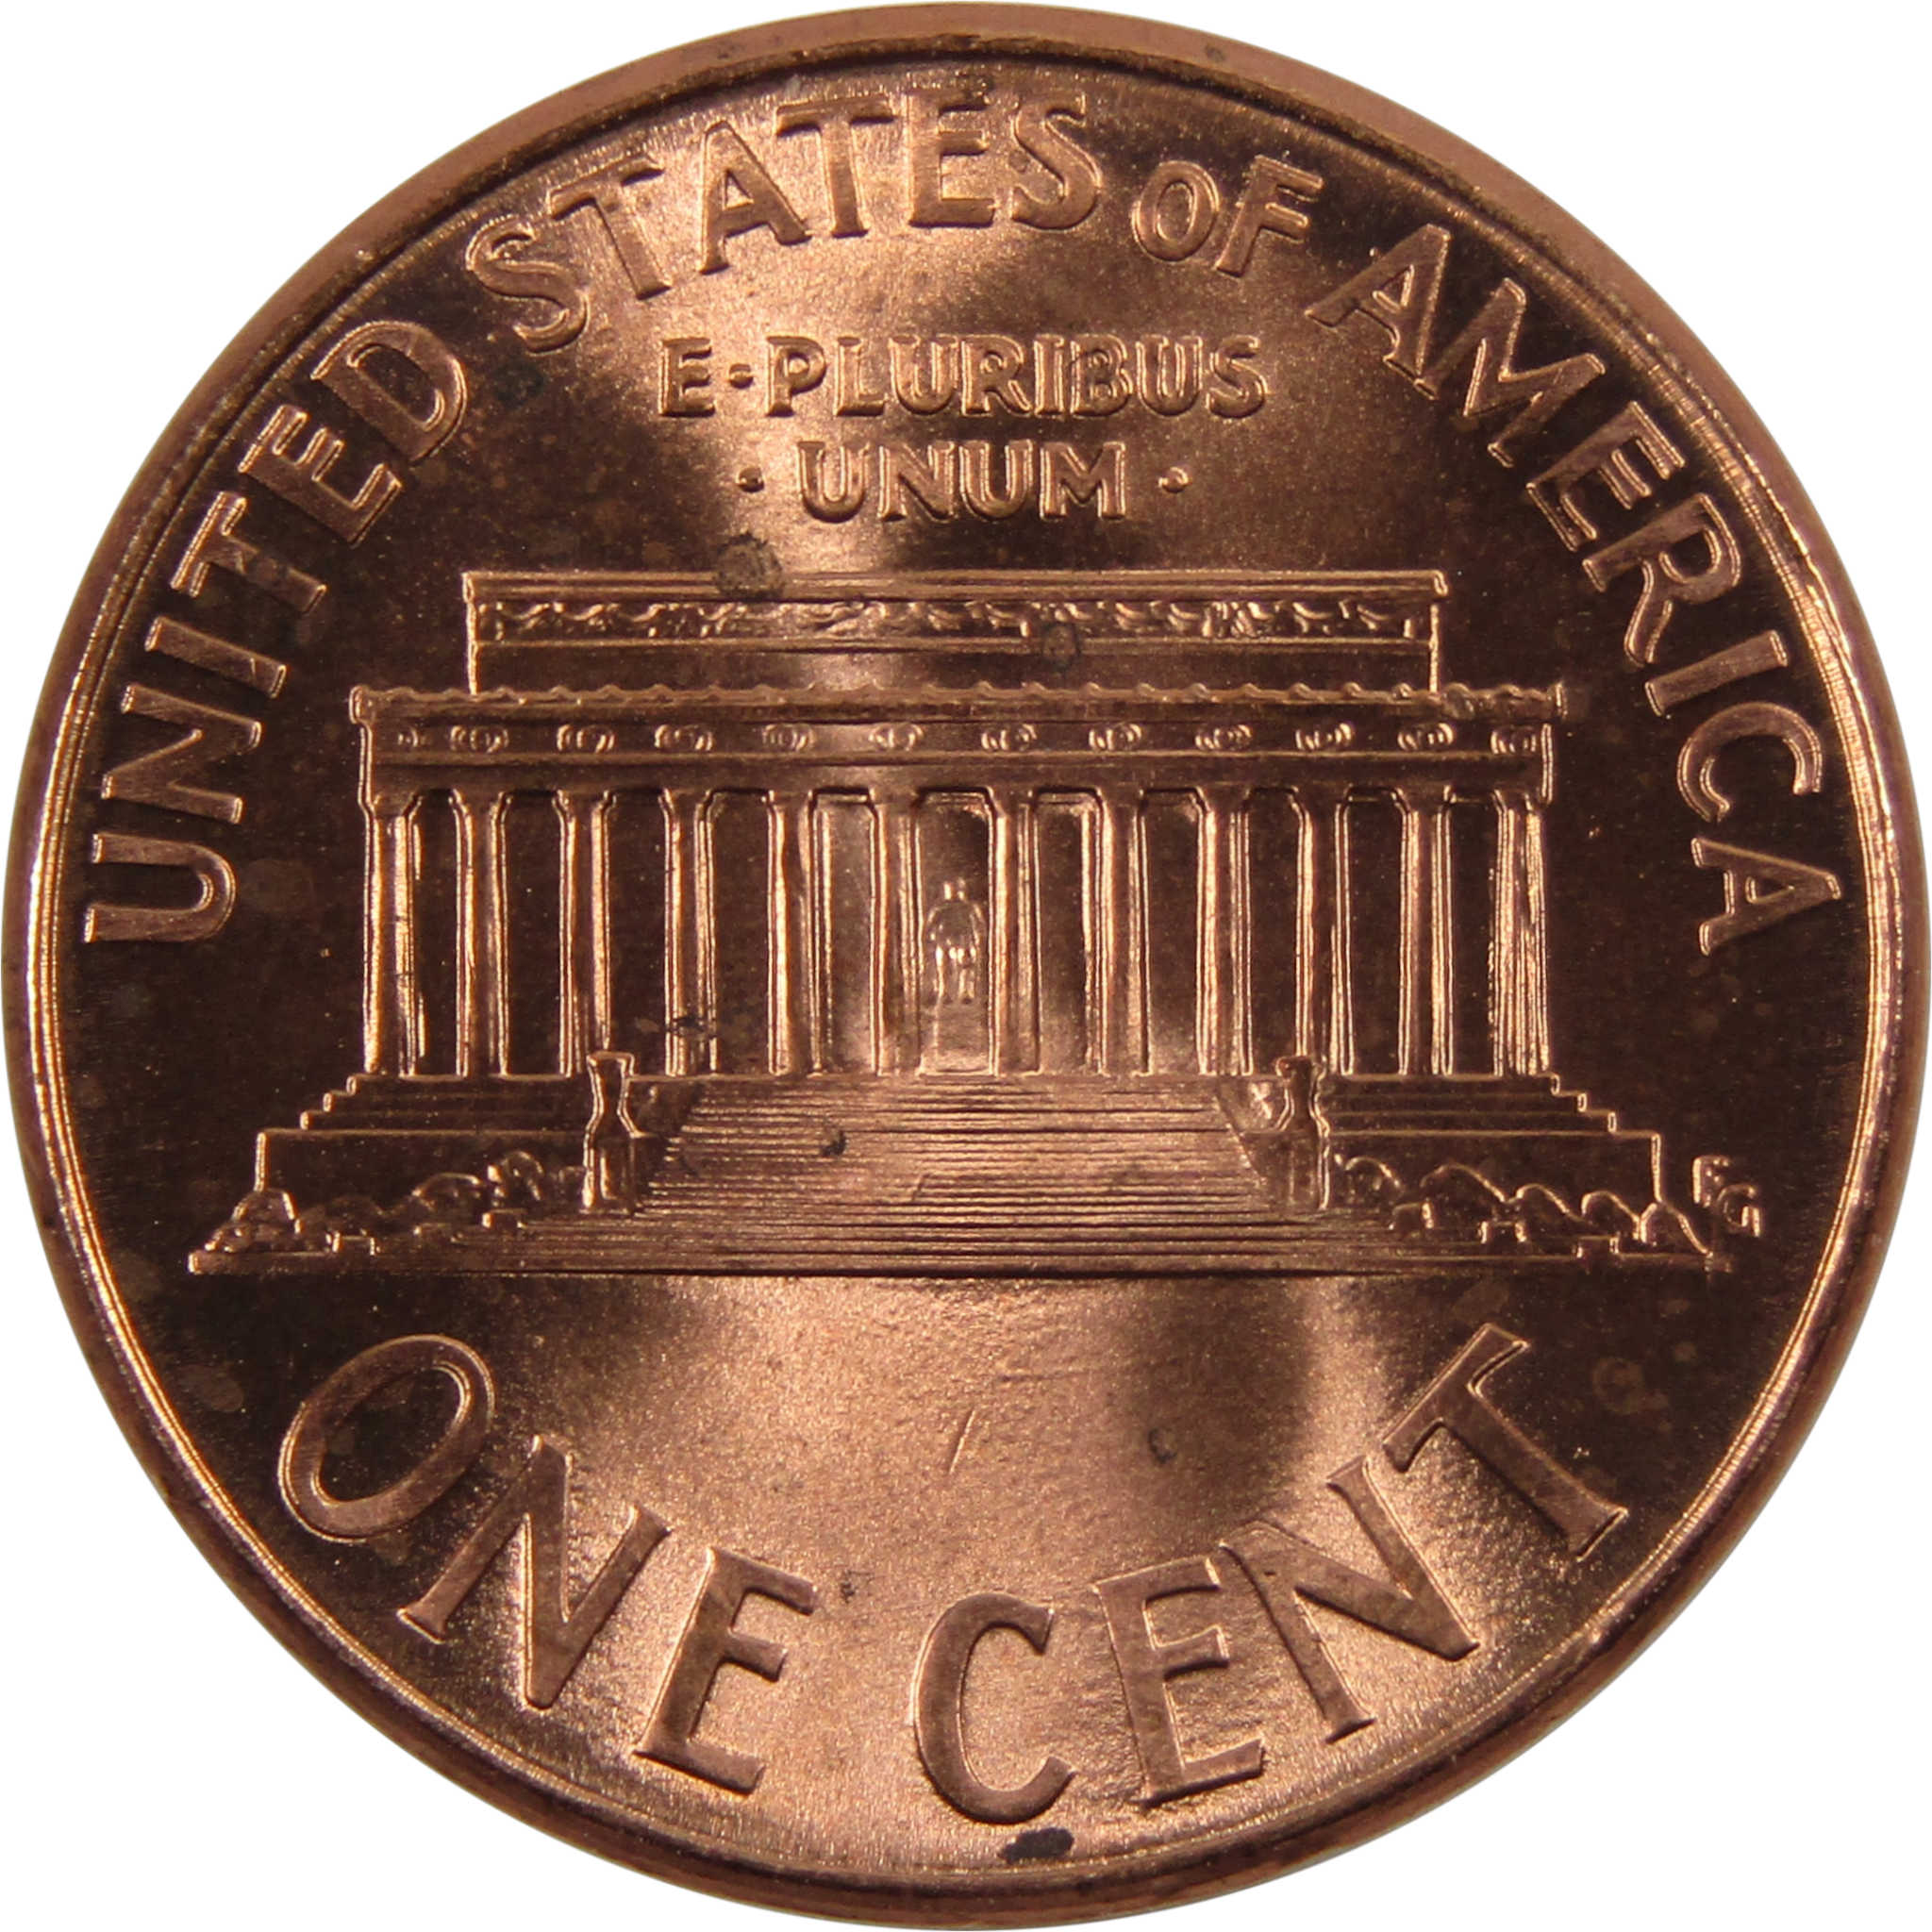 2000 D Lincoln Memorial Cent BU Uncirculated Penny 1c Coin